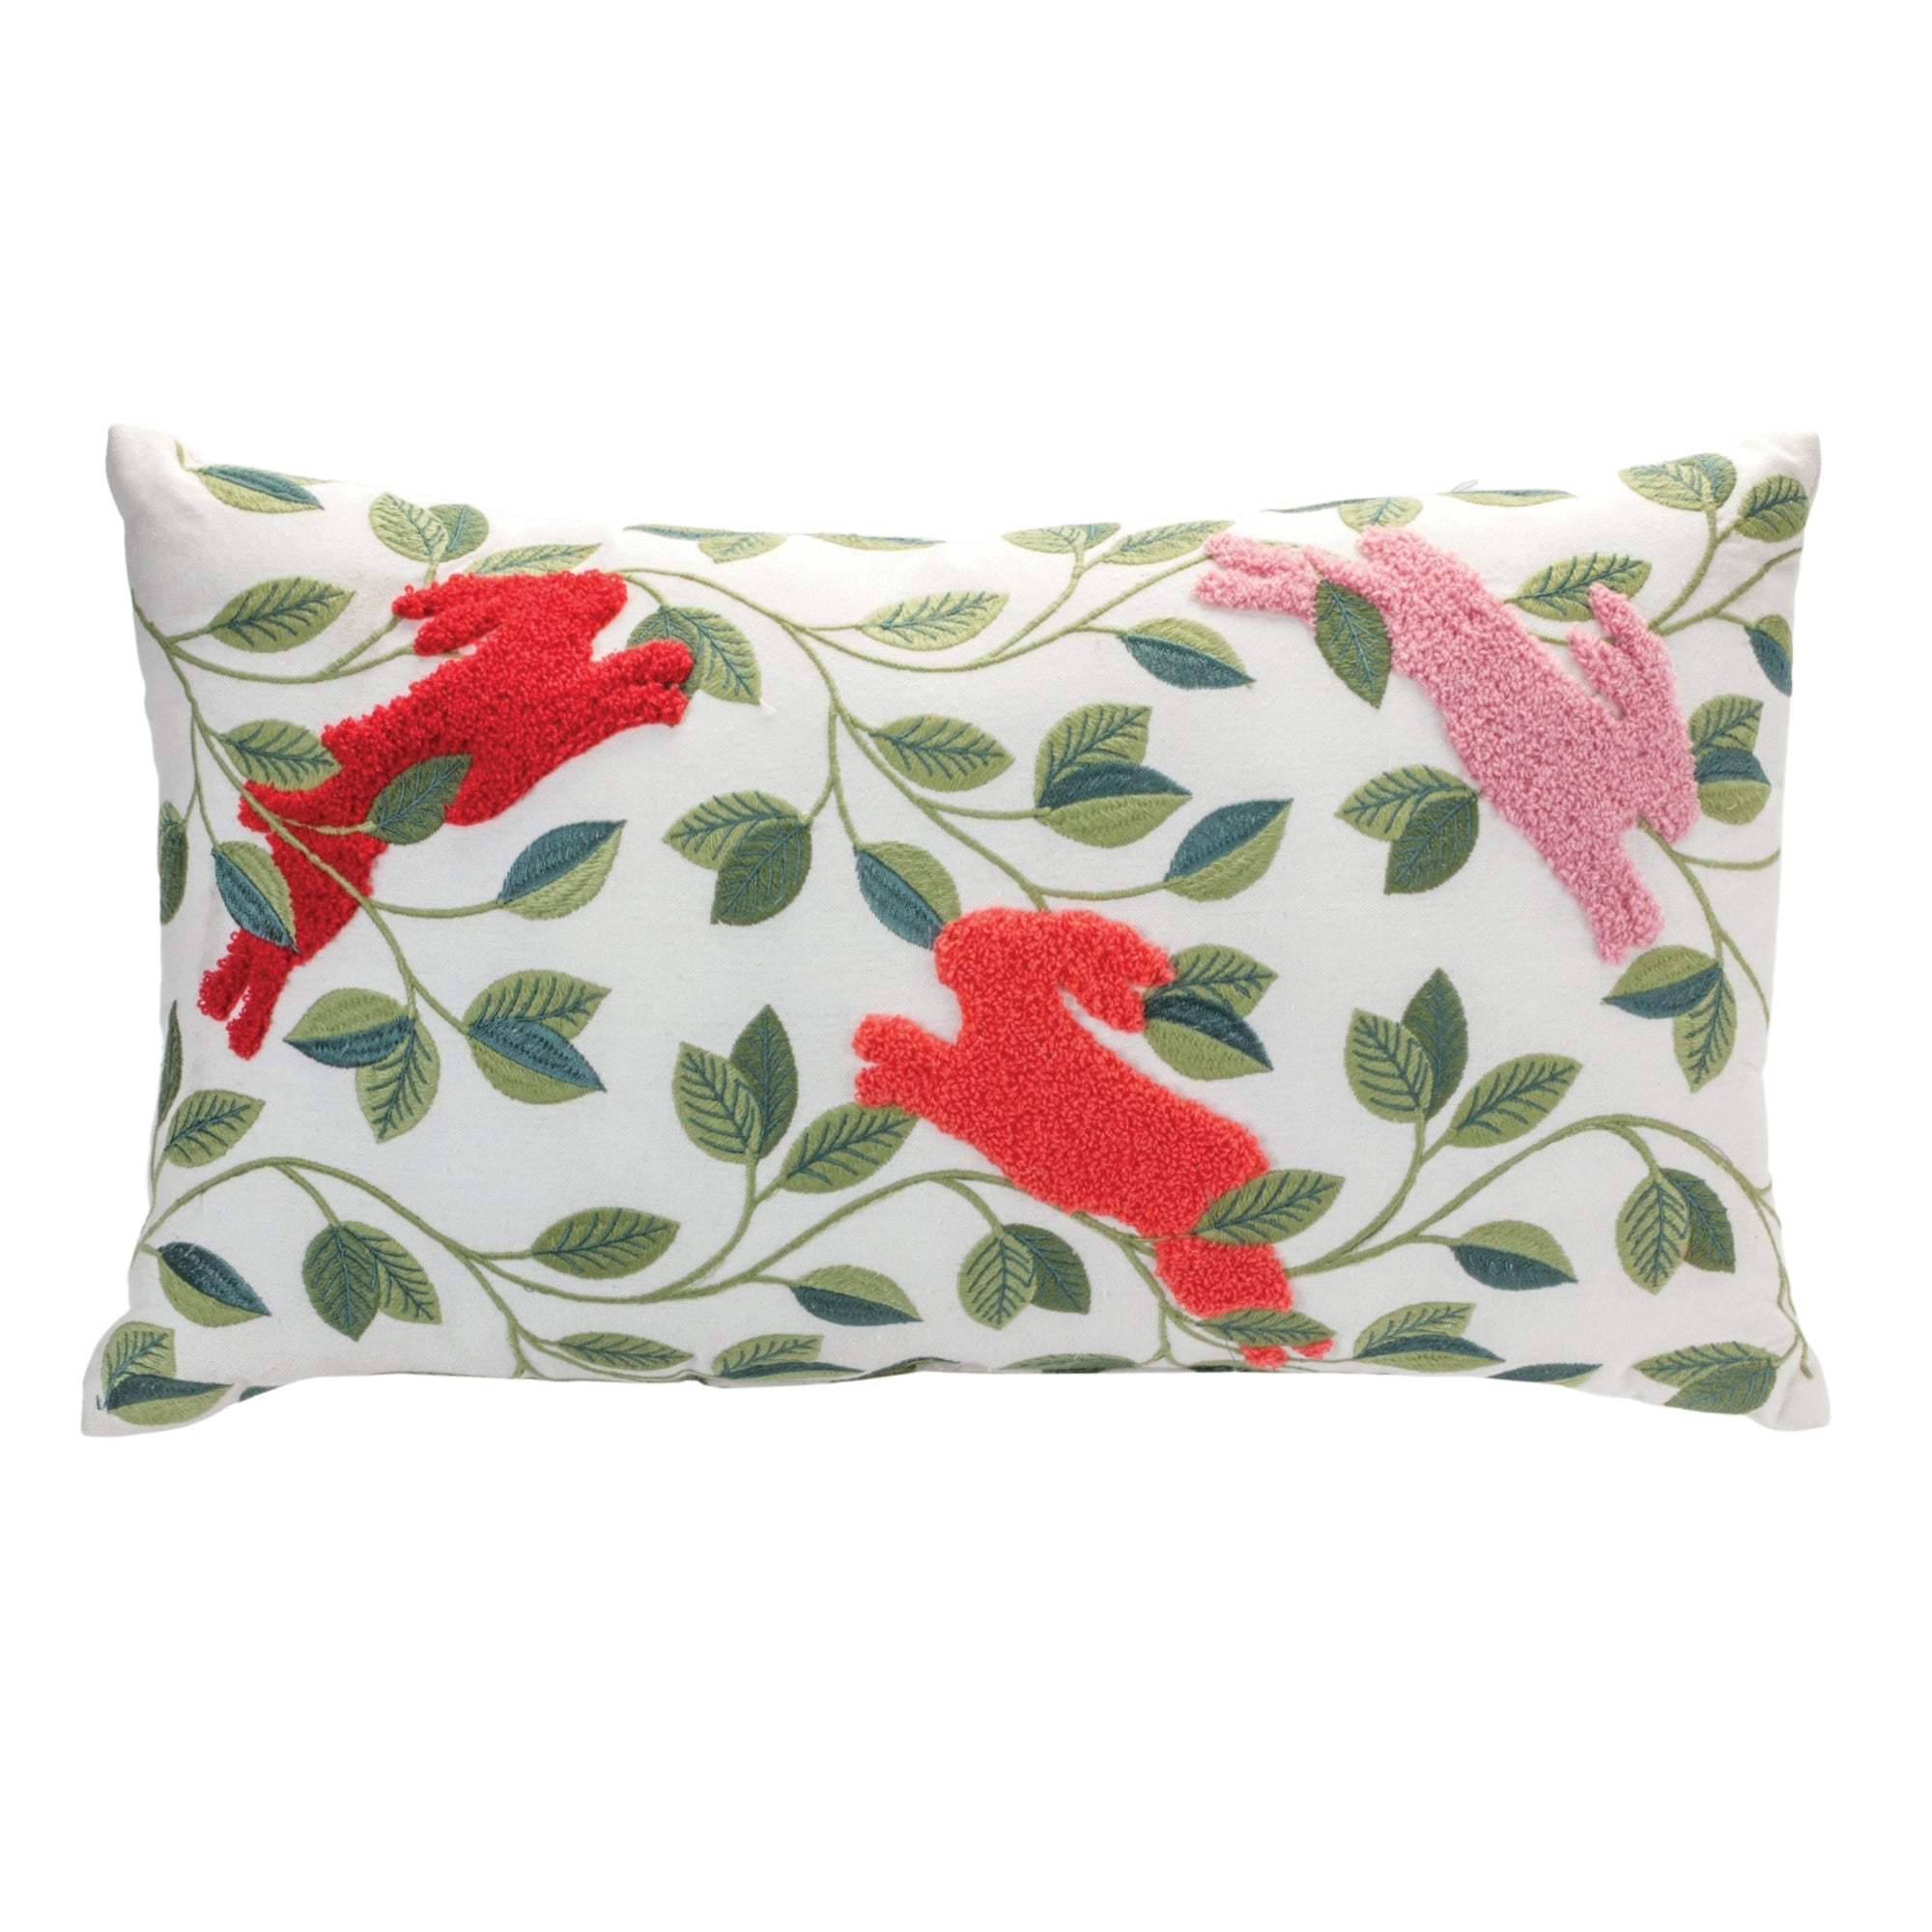 Embroidered Rabbits Throw Pillow 12"L